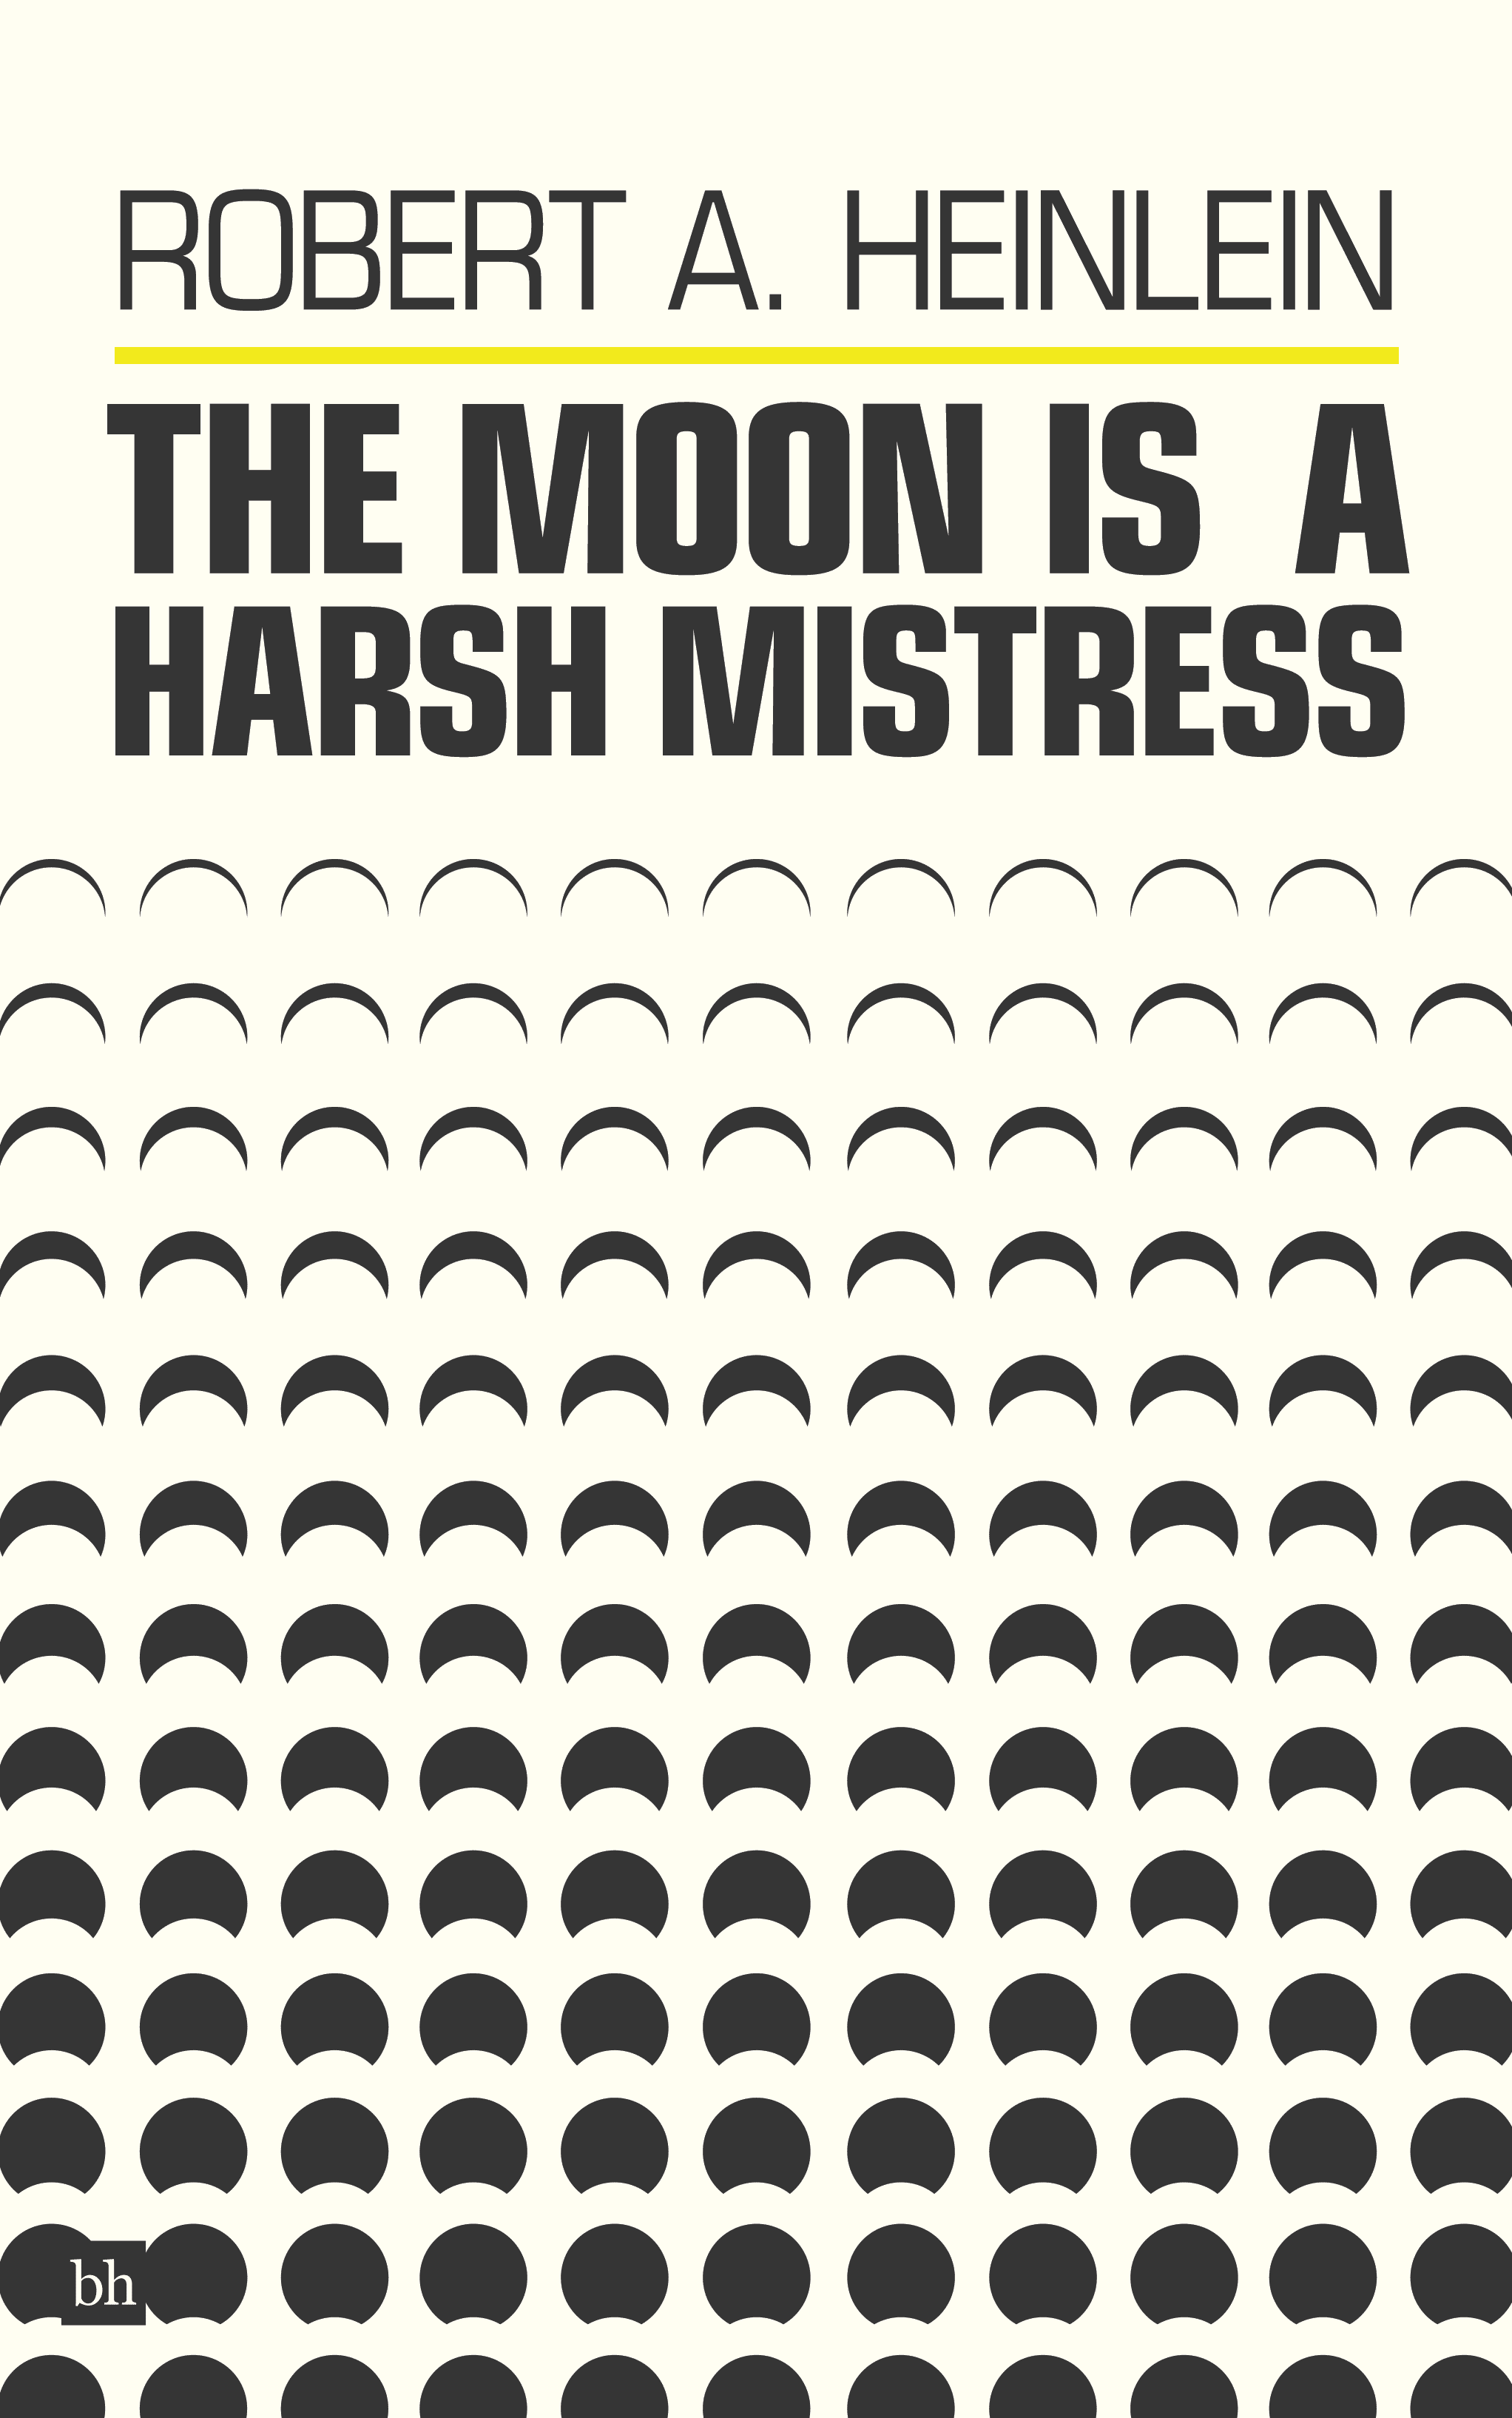 Book cover mock thumbnail for The Moon Is A Harsh Mistress